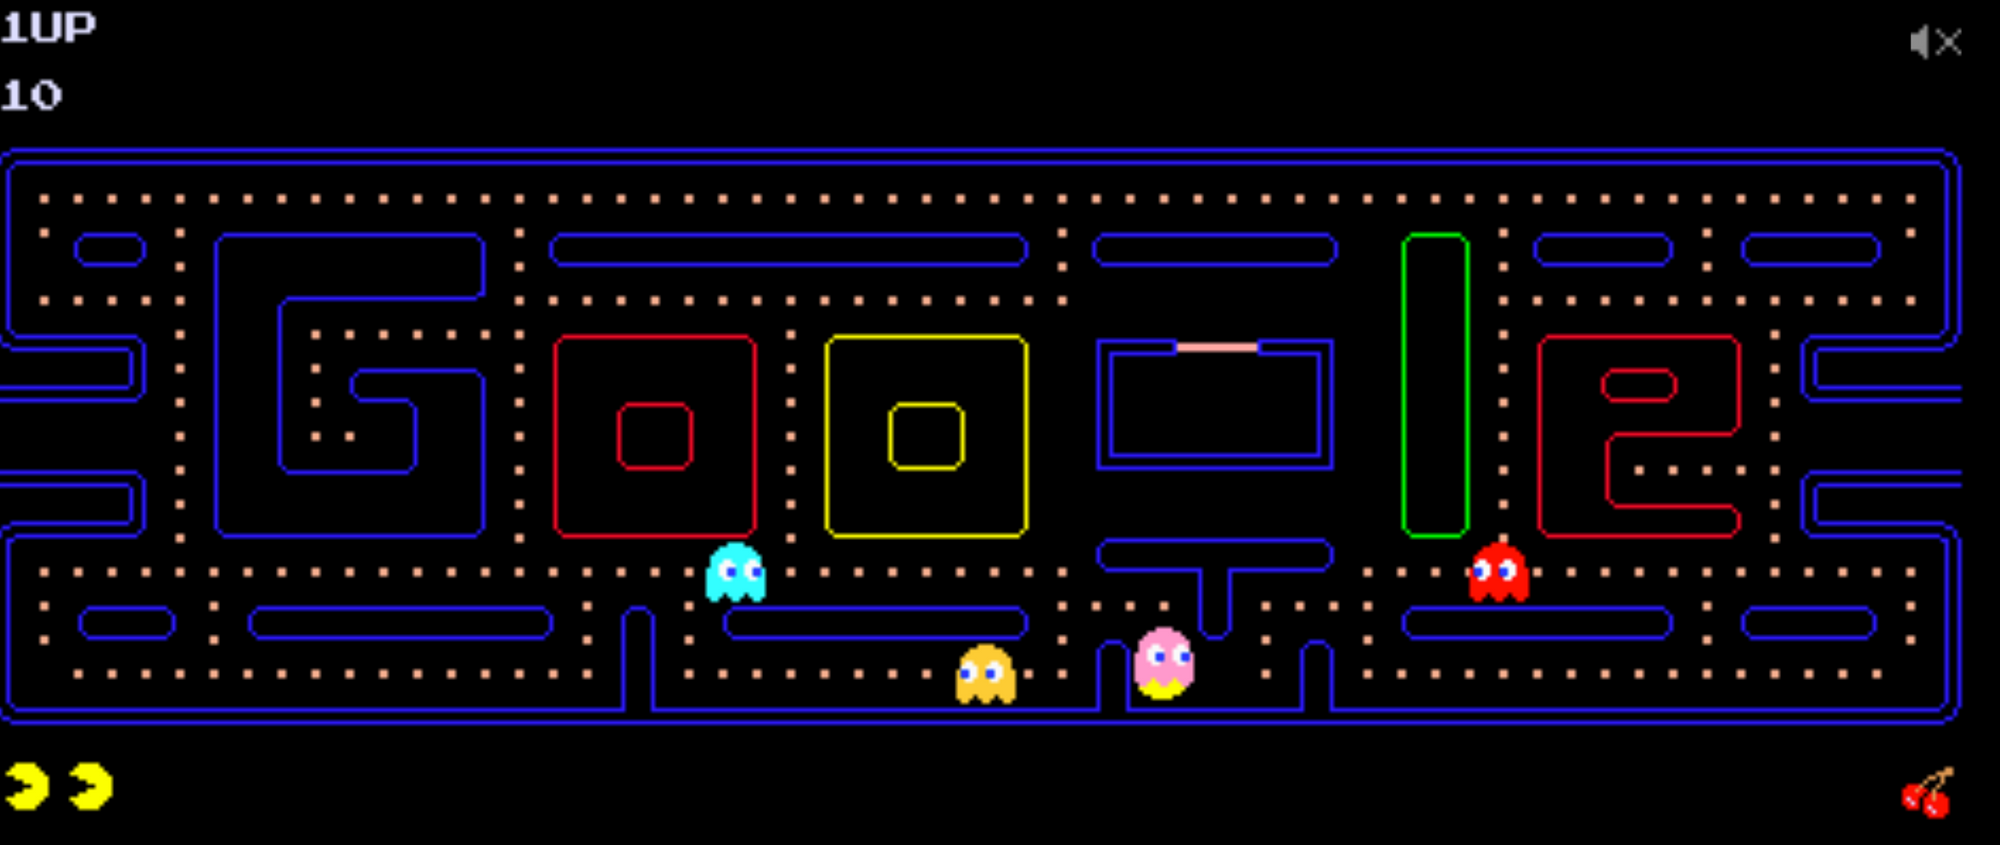 Play Google PAC-MAN 30th Anniversary Online Game - Free on PC